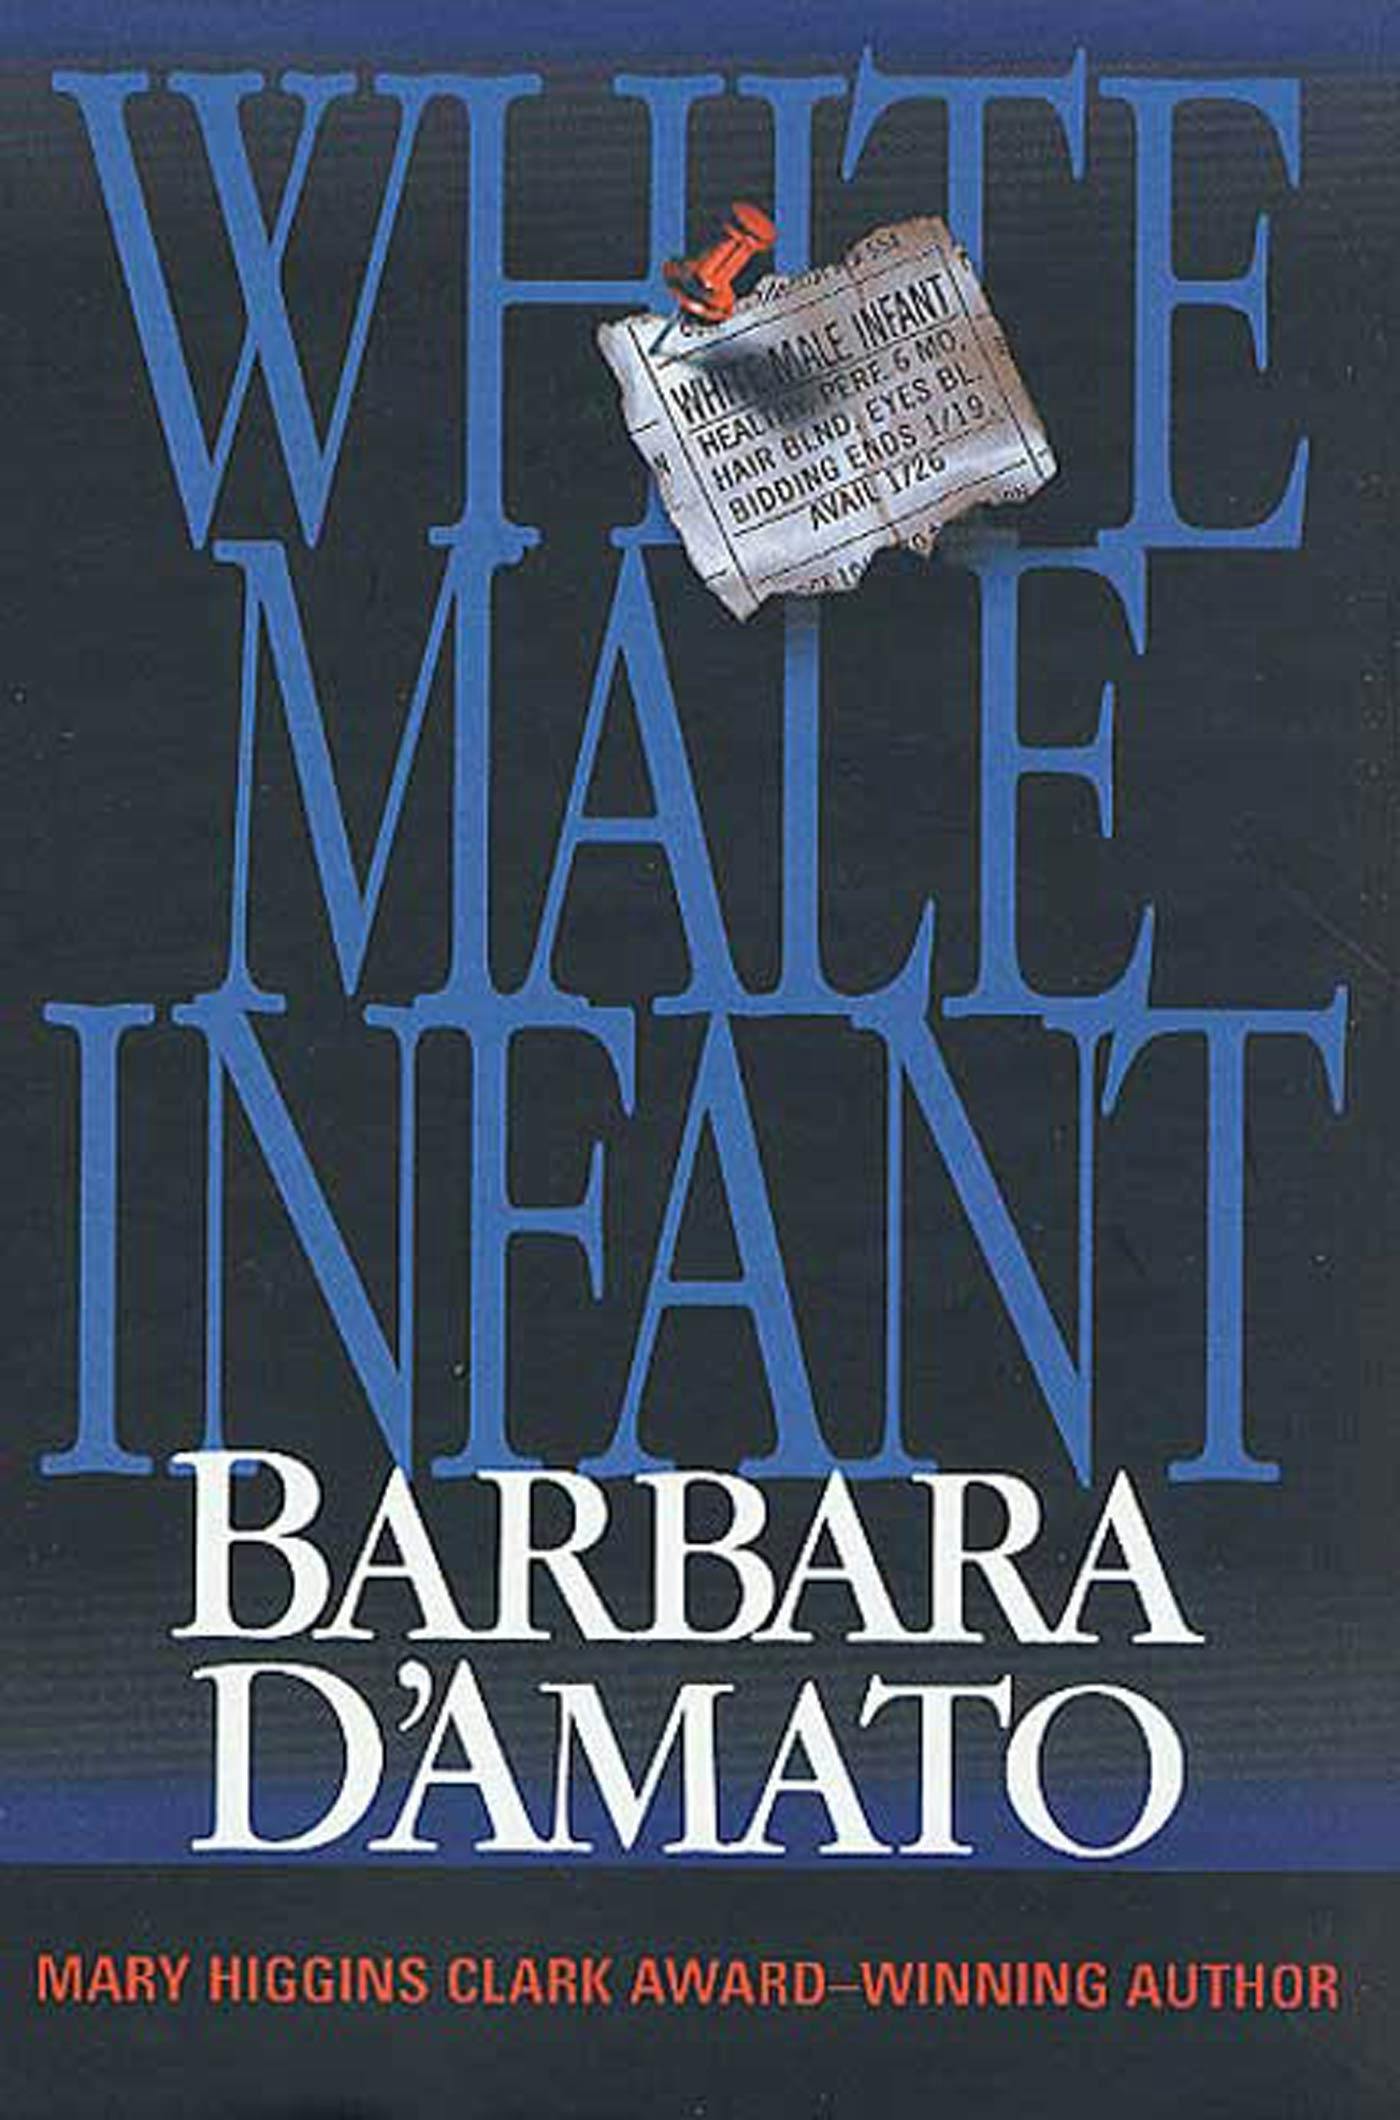 Cover for the book titled as: White Male Infant